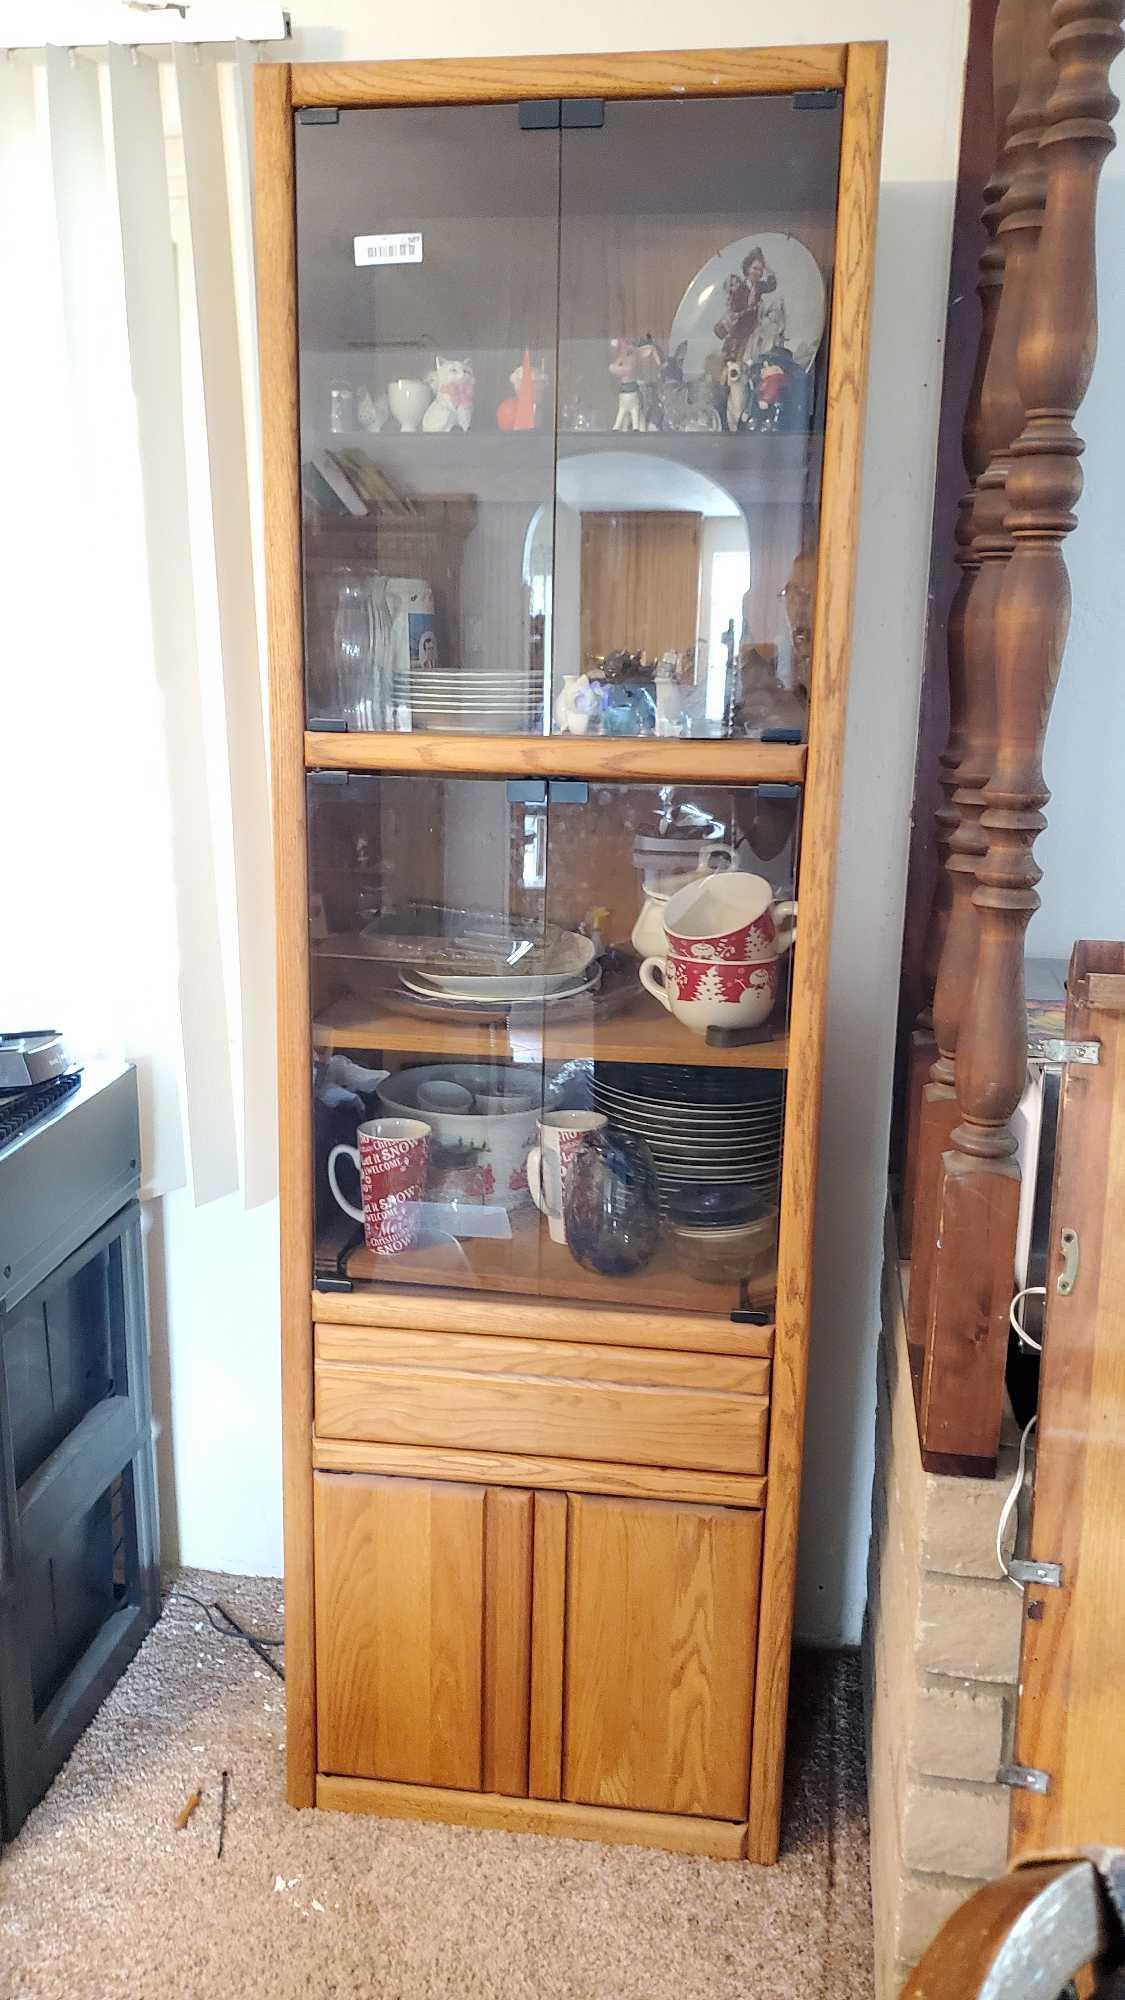 Wooden china hutch/cabinet with contents @ farm